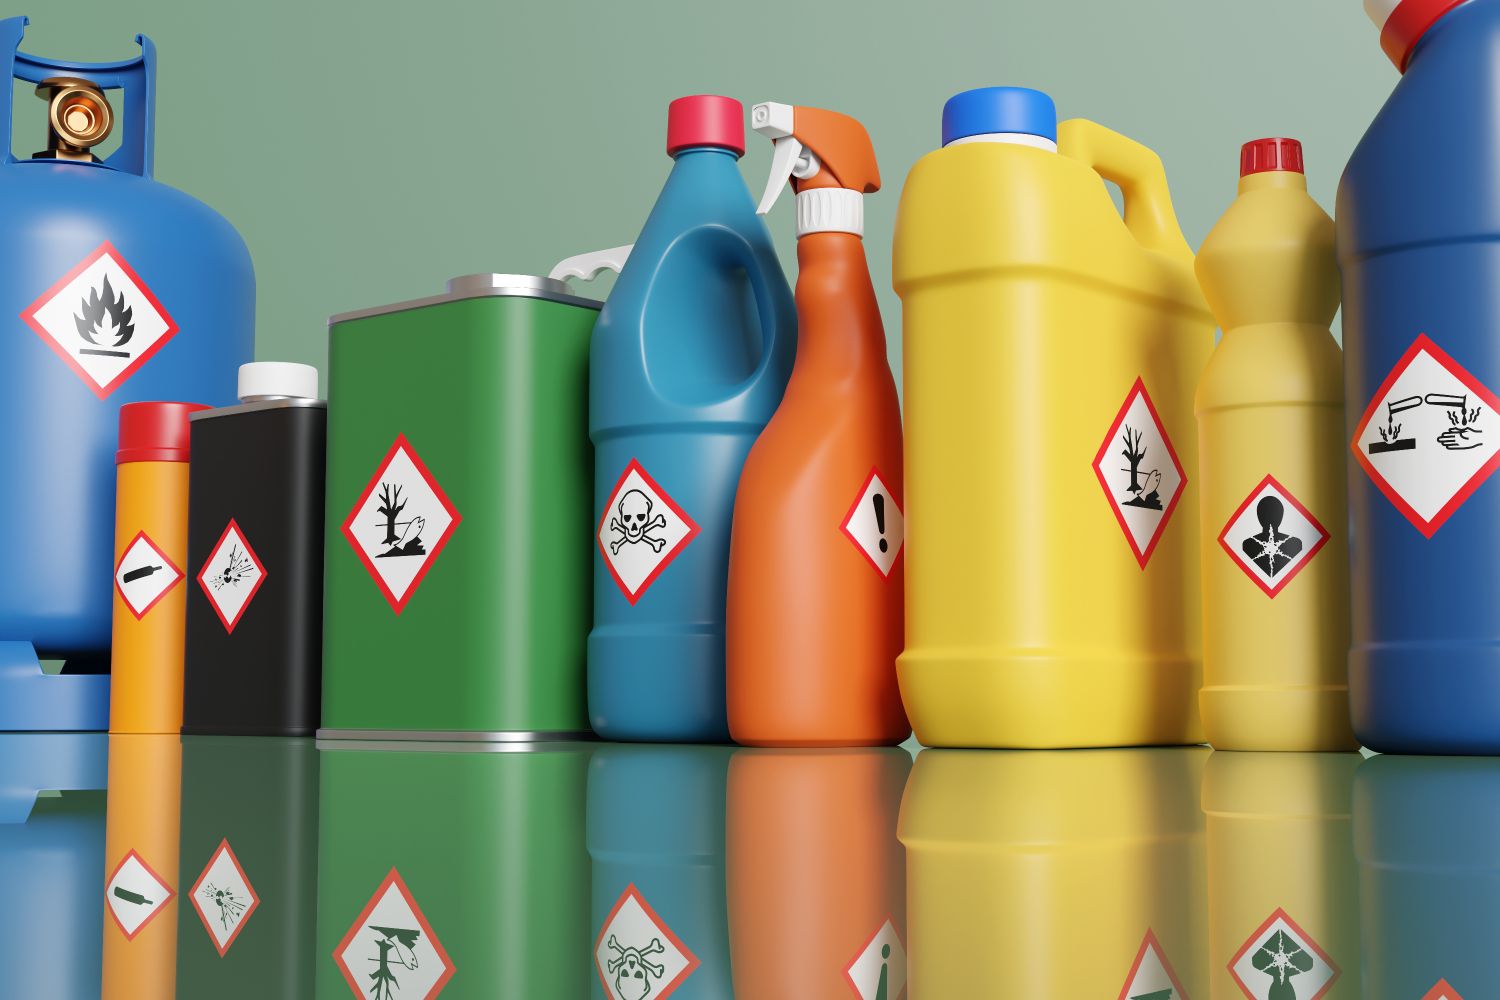 Bottles and metal containers with hazardous waste labels 